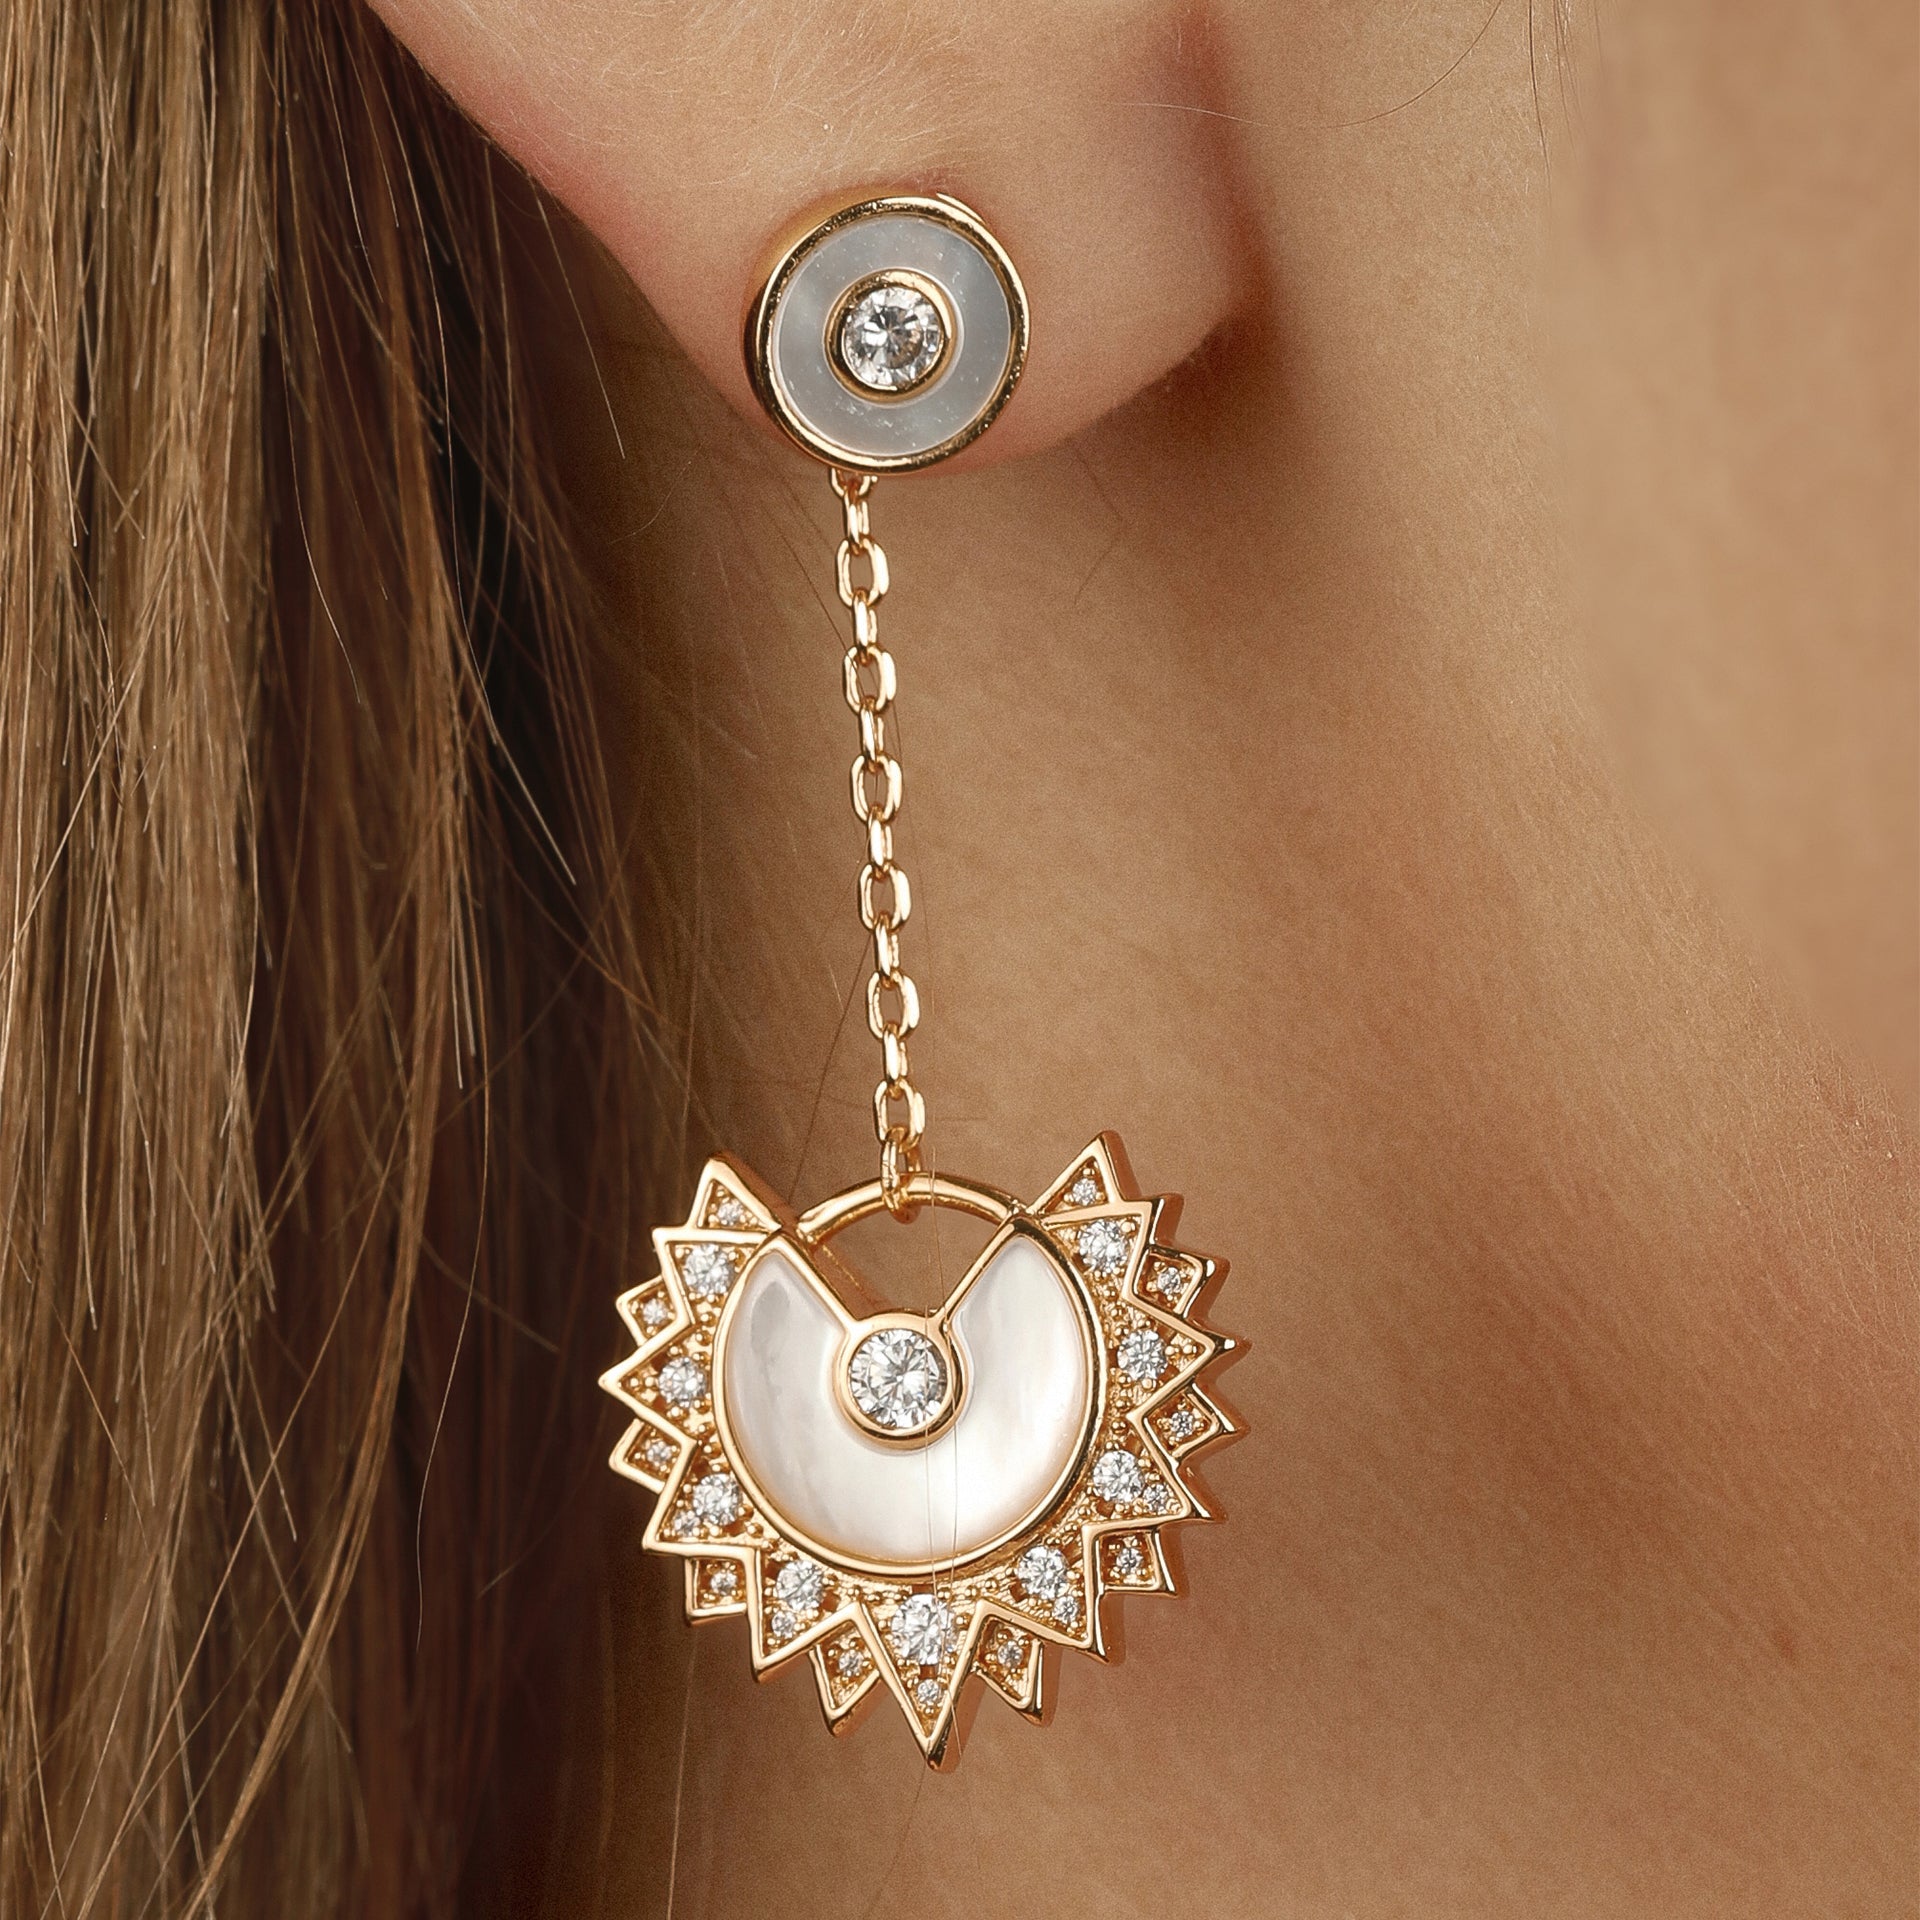 Gold Sunshine Earrings From Le-Soleil